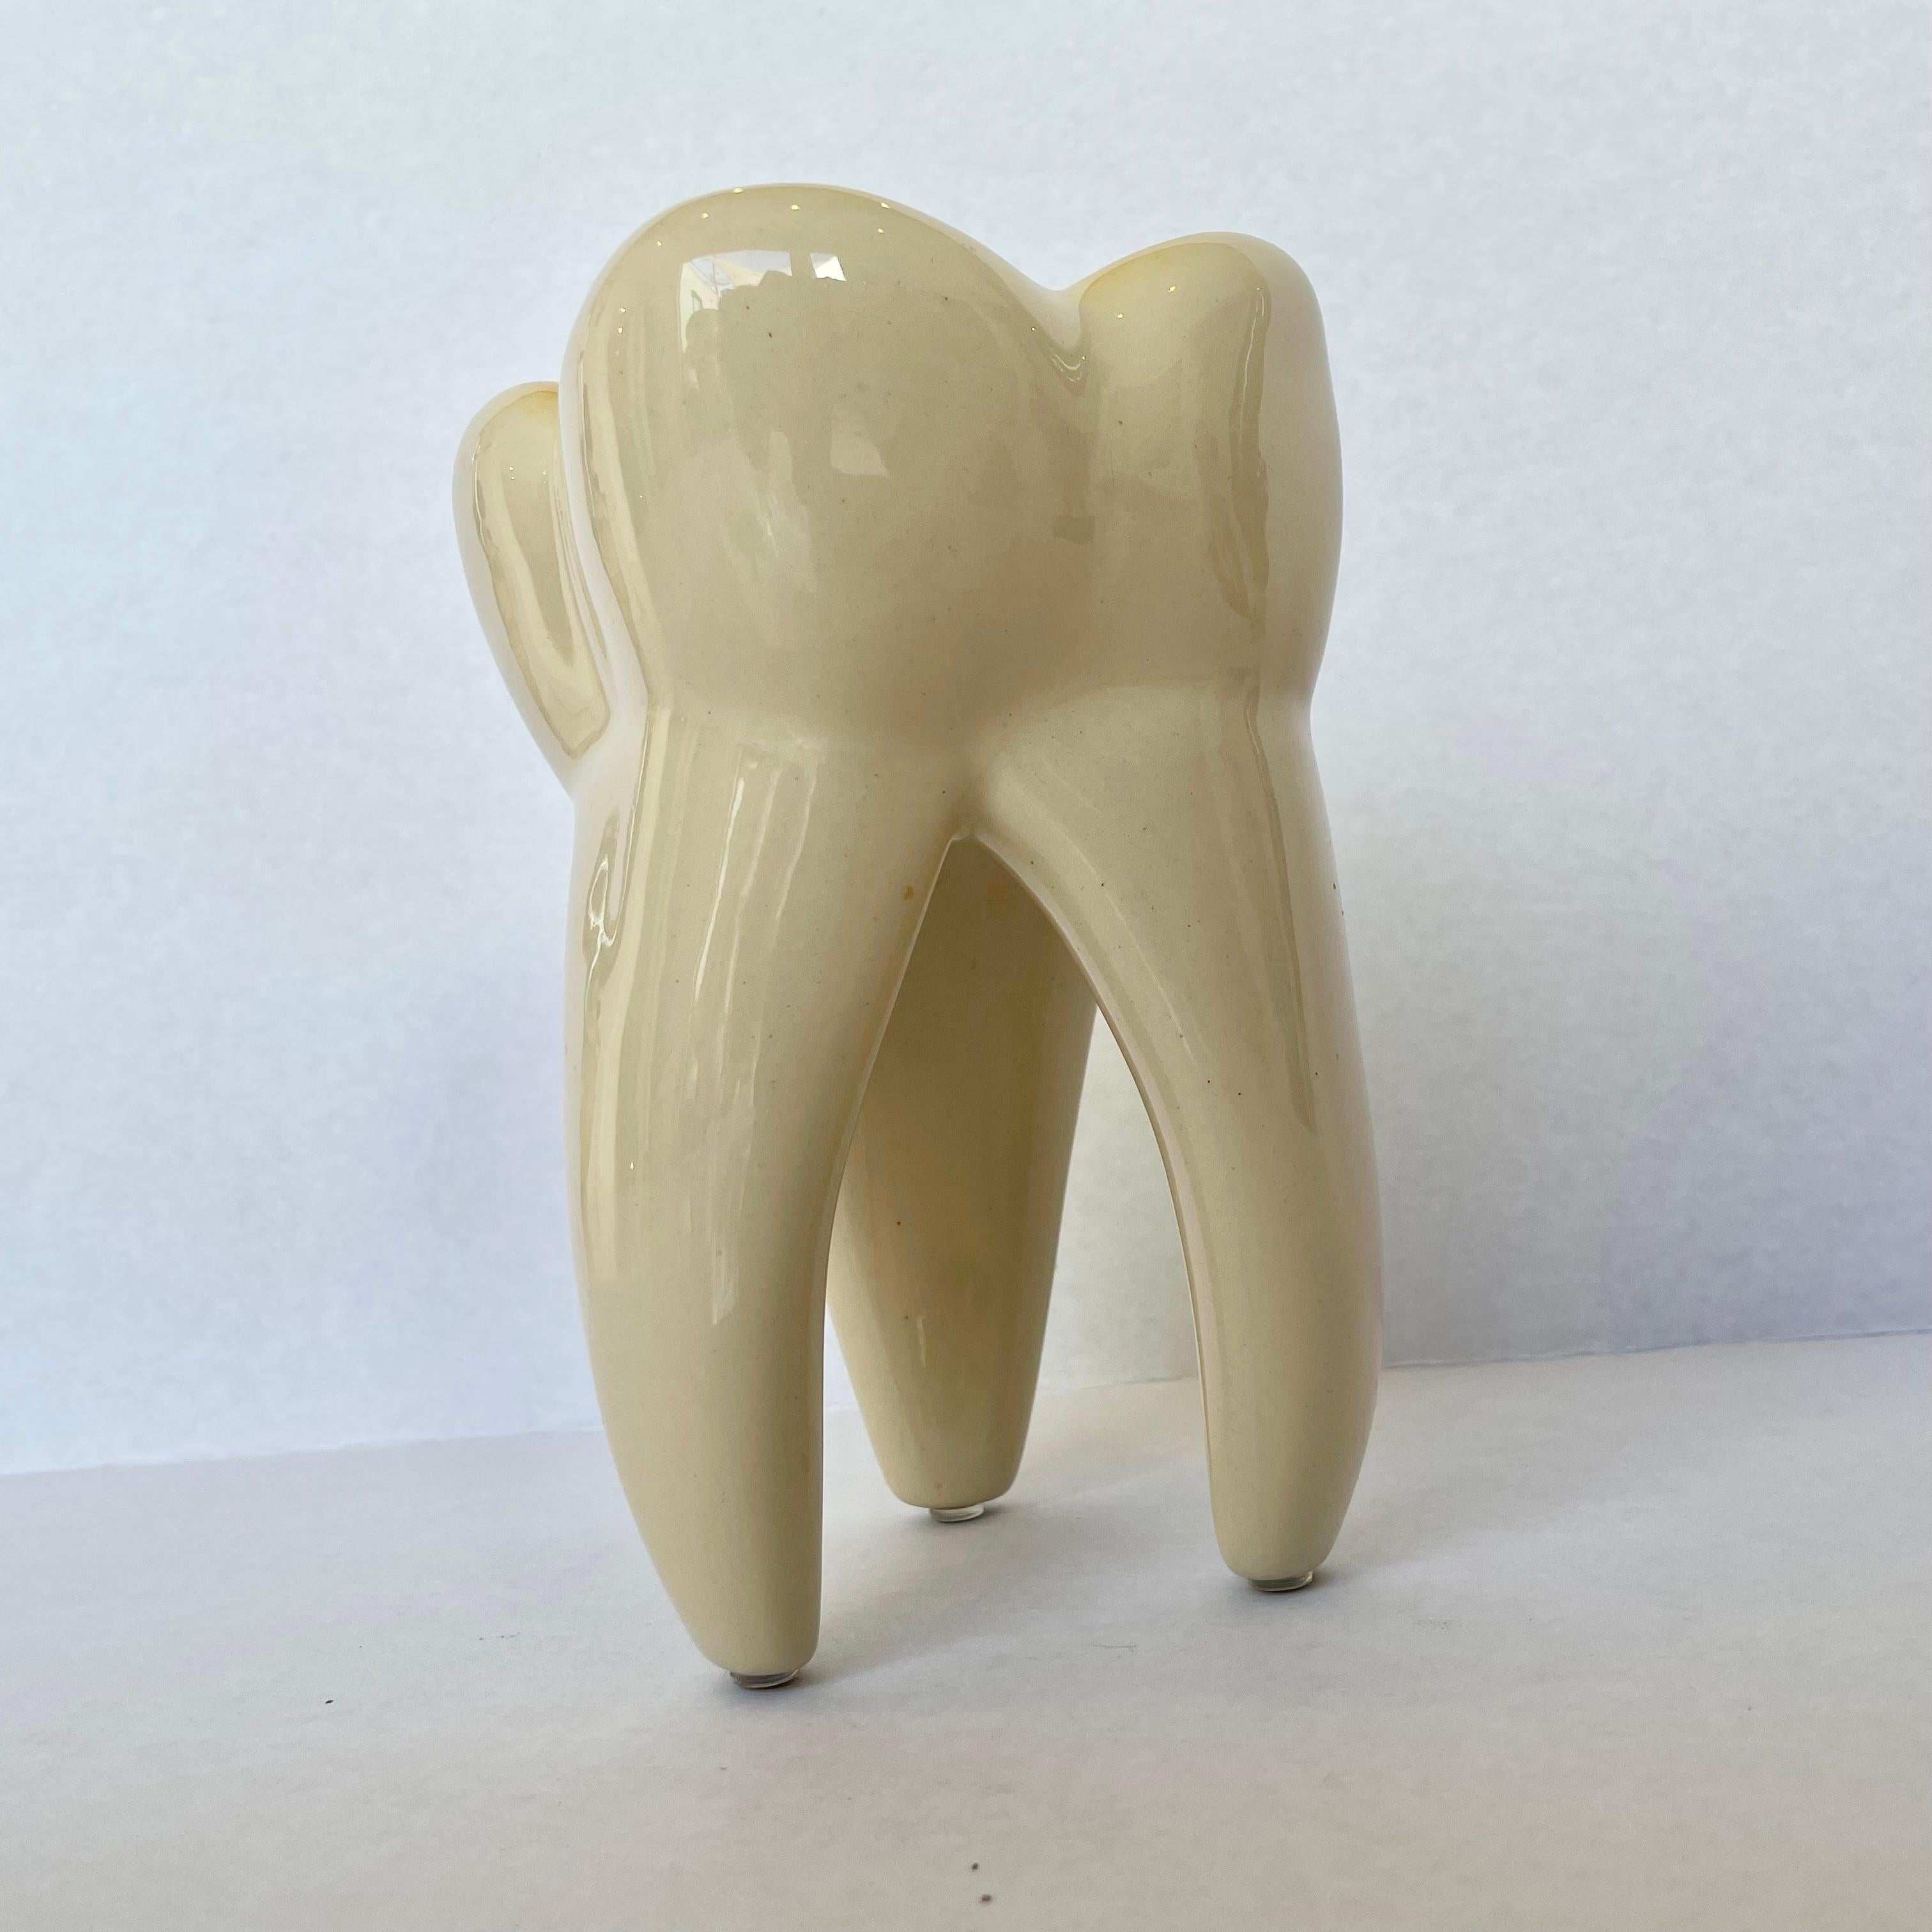 Unique oversized molar catchall sculpture from France. Heavy and well made. Just under 7